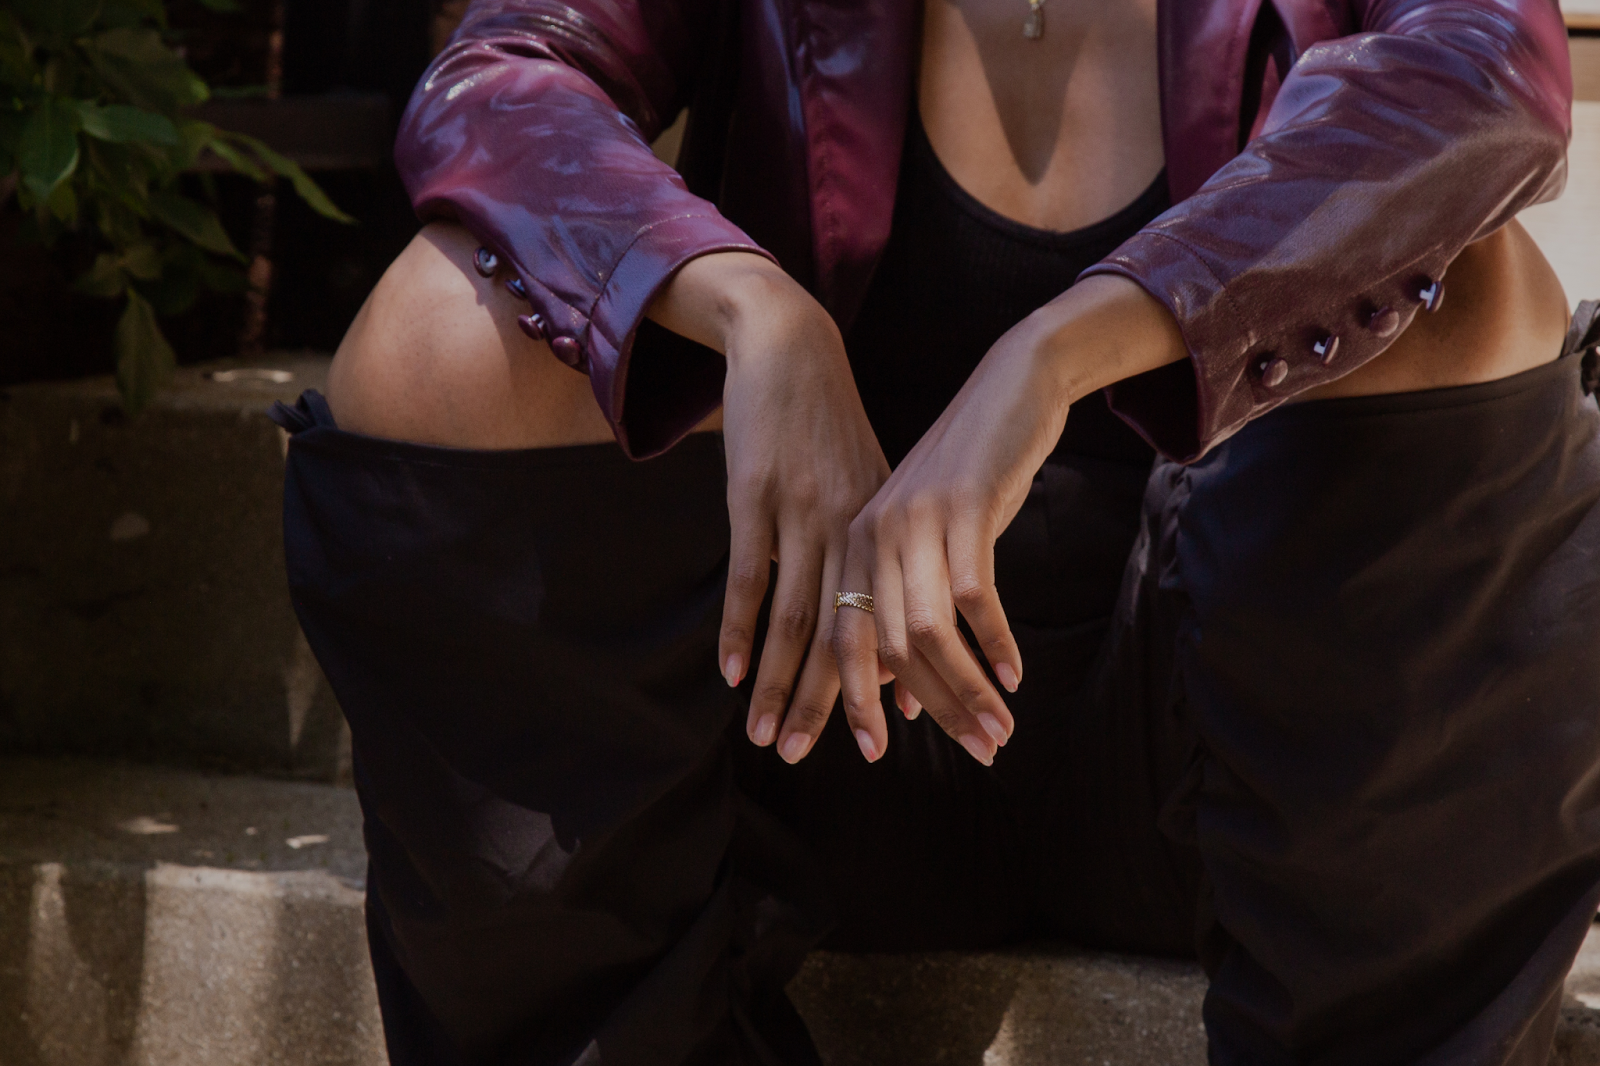 Image: The portrait features Barédu sitting on a shaded, concrete stoop. She is wearing a long burgundy jacket with black pants. Her arms are resting on her knees with both hands meeting in the middle. Image captured and edited by Joshua Johnson.